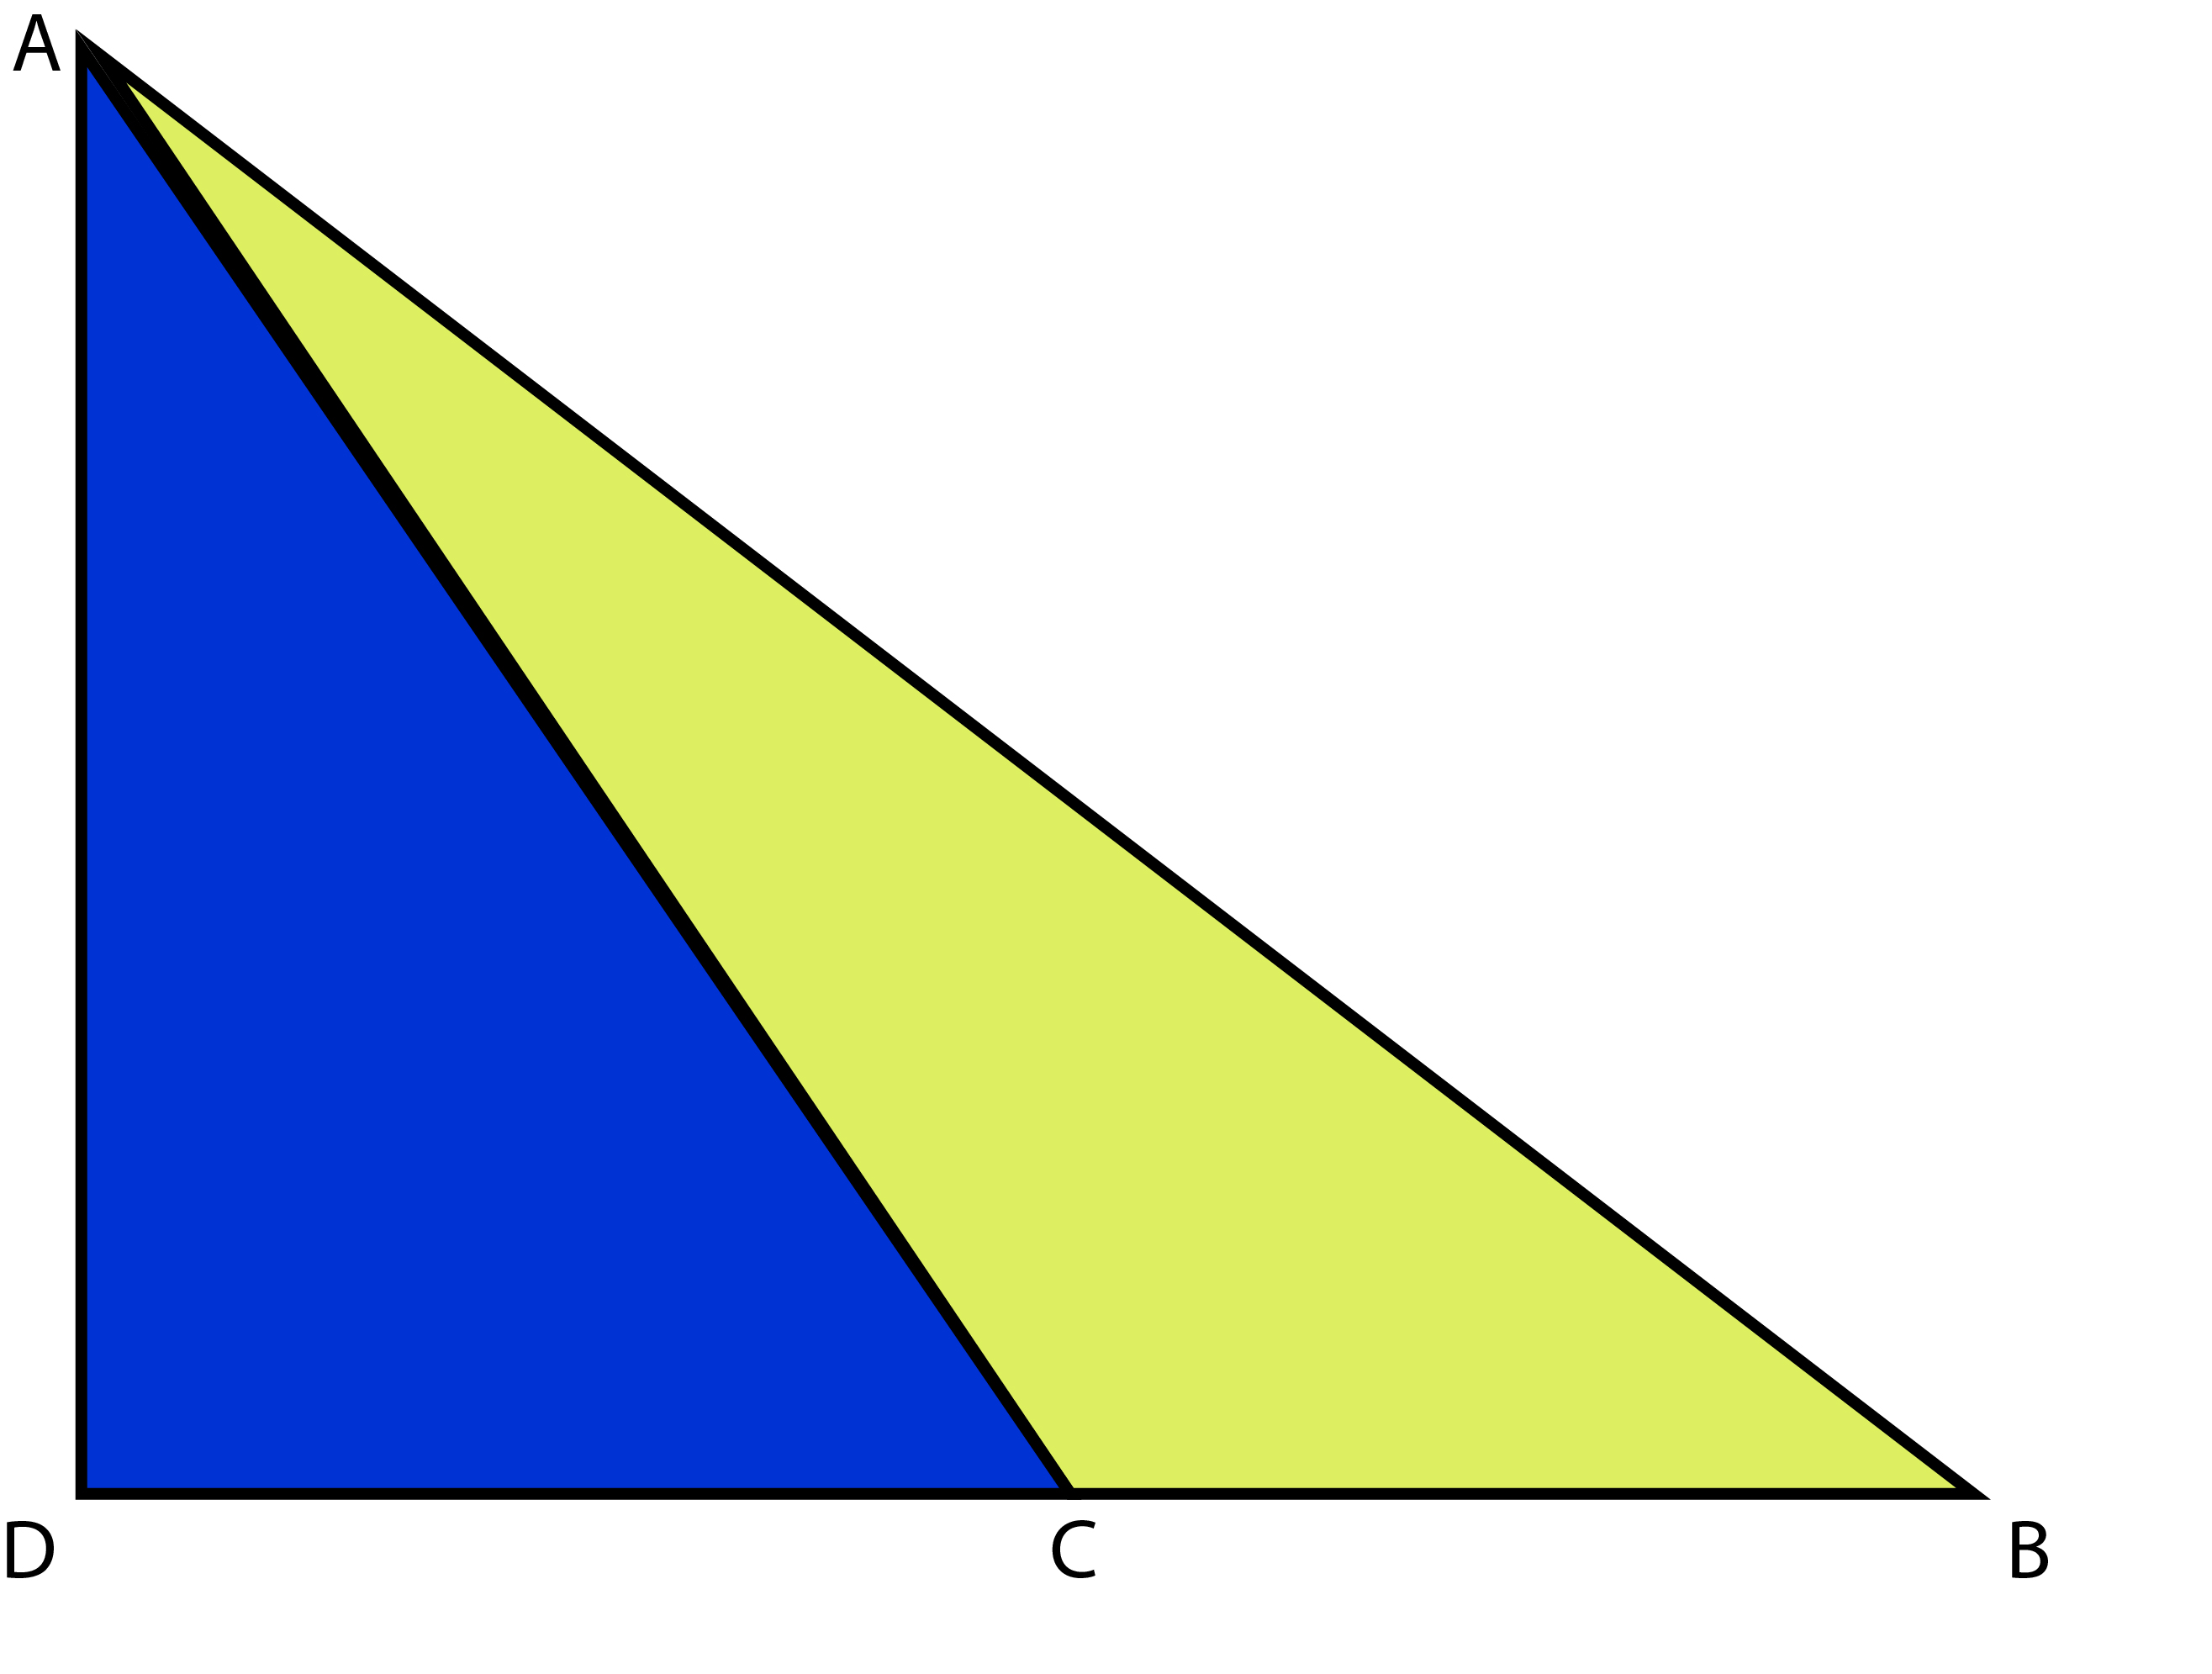 Turning the slanting triangle here into a right angle triangle makes working out the area a lot easier to understand